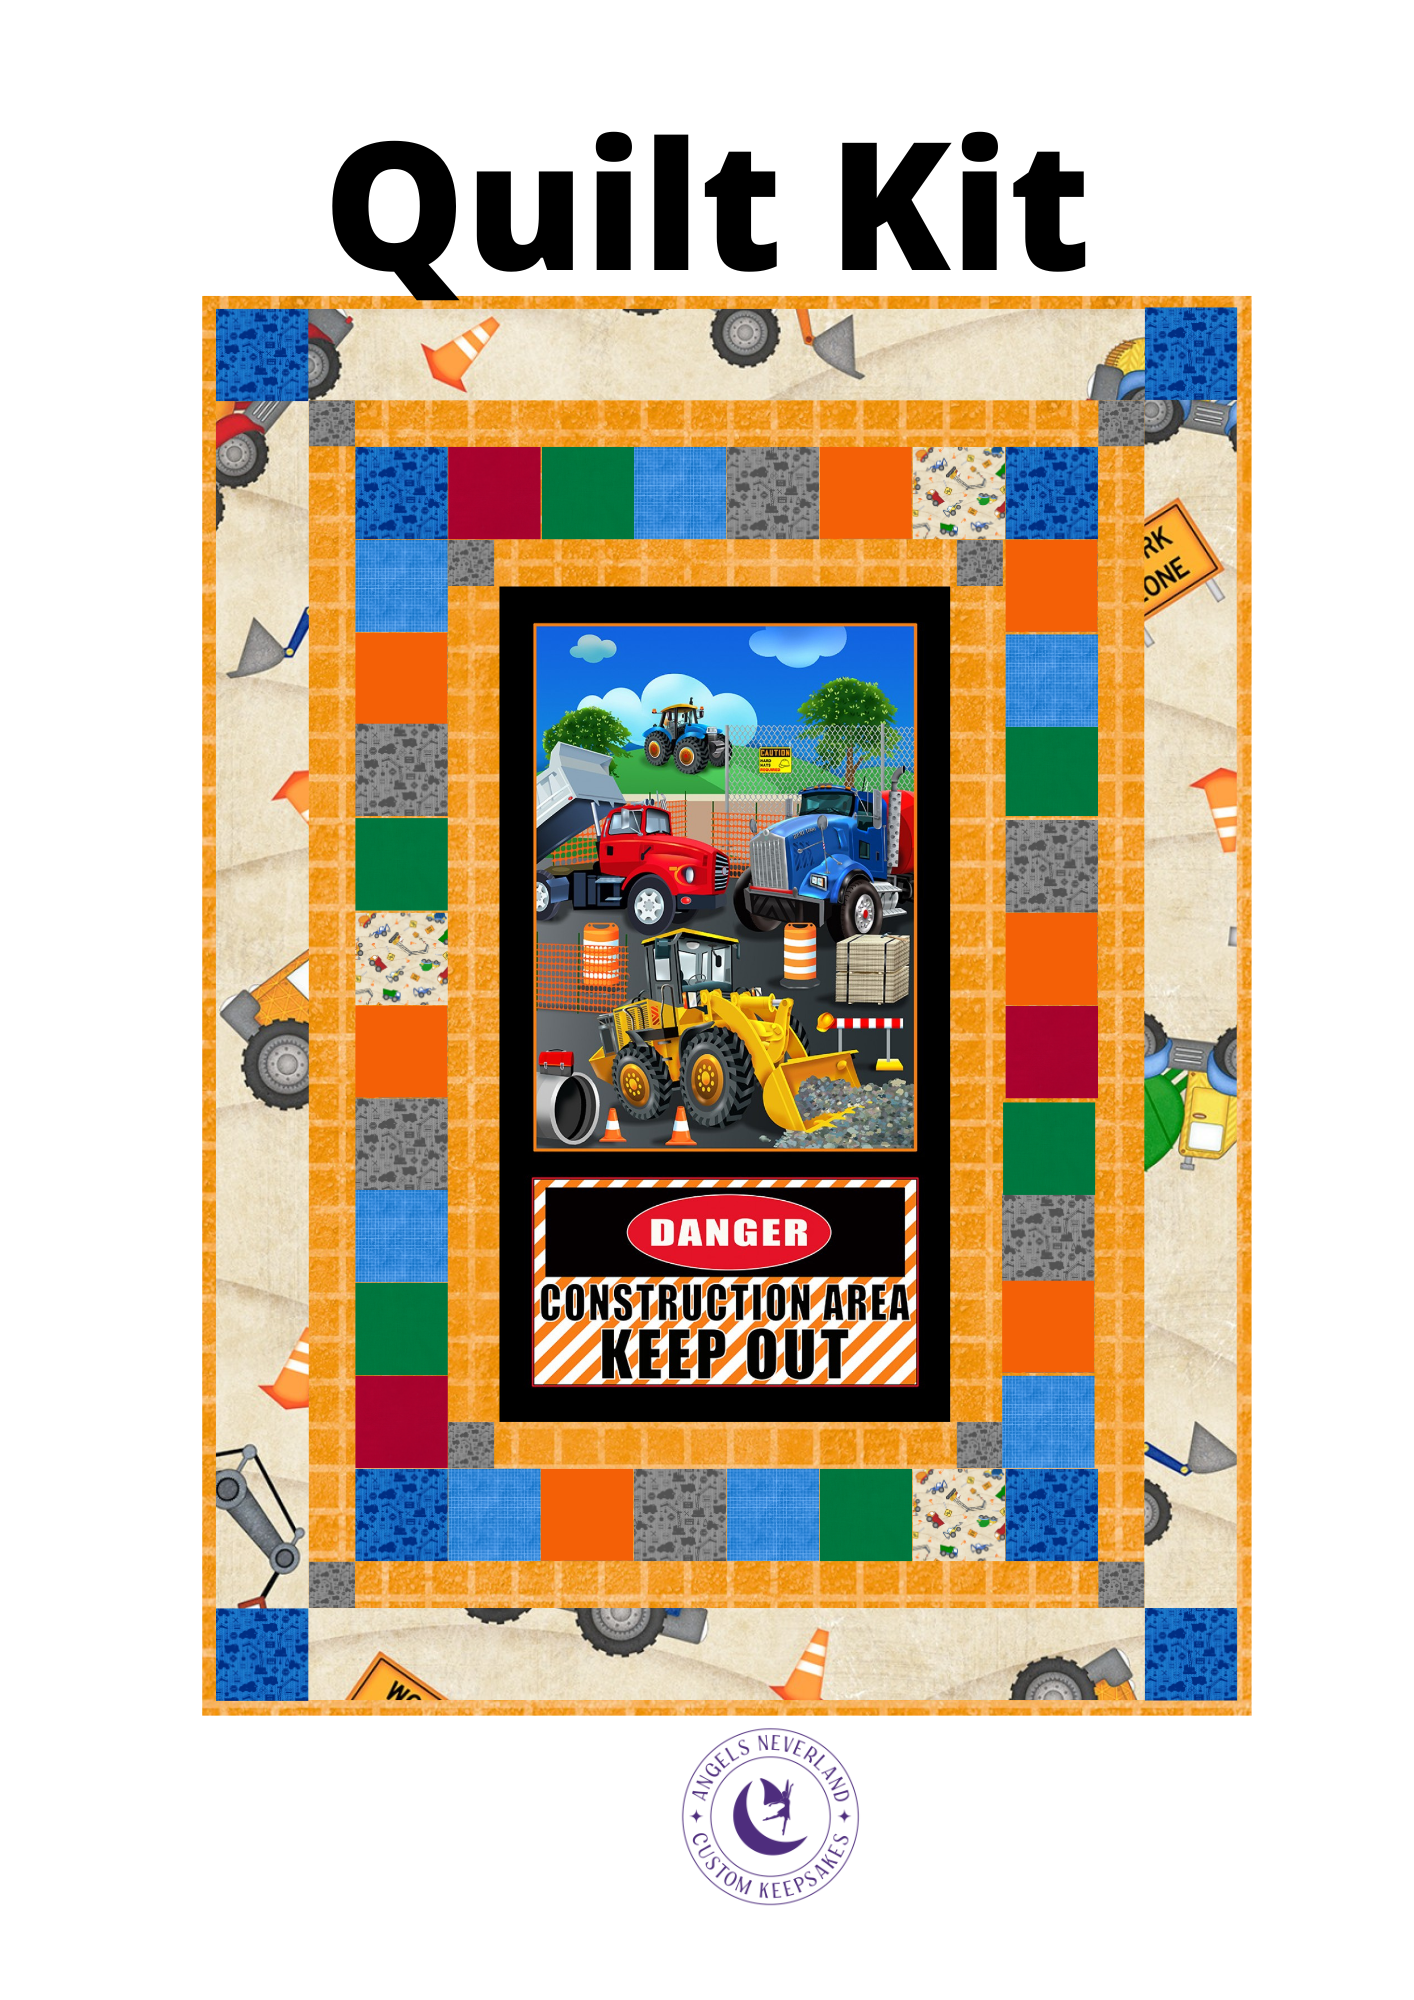 angelsneverland Quilt Kit QUILT KIT NO BACKING Building Dreams by Wilmington Prints & Construction Zone Panel Easy DIY Beginner QUILT KIT Construction Equipment Picture This Pattern